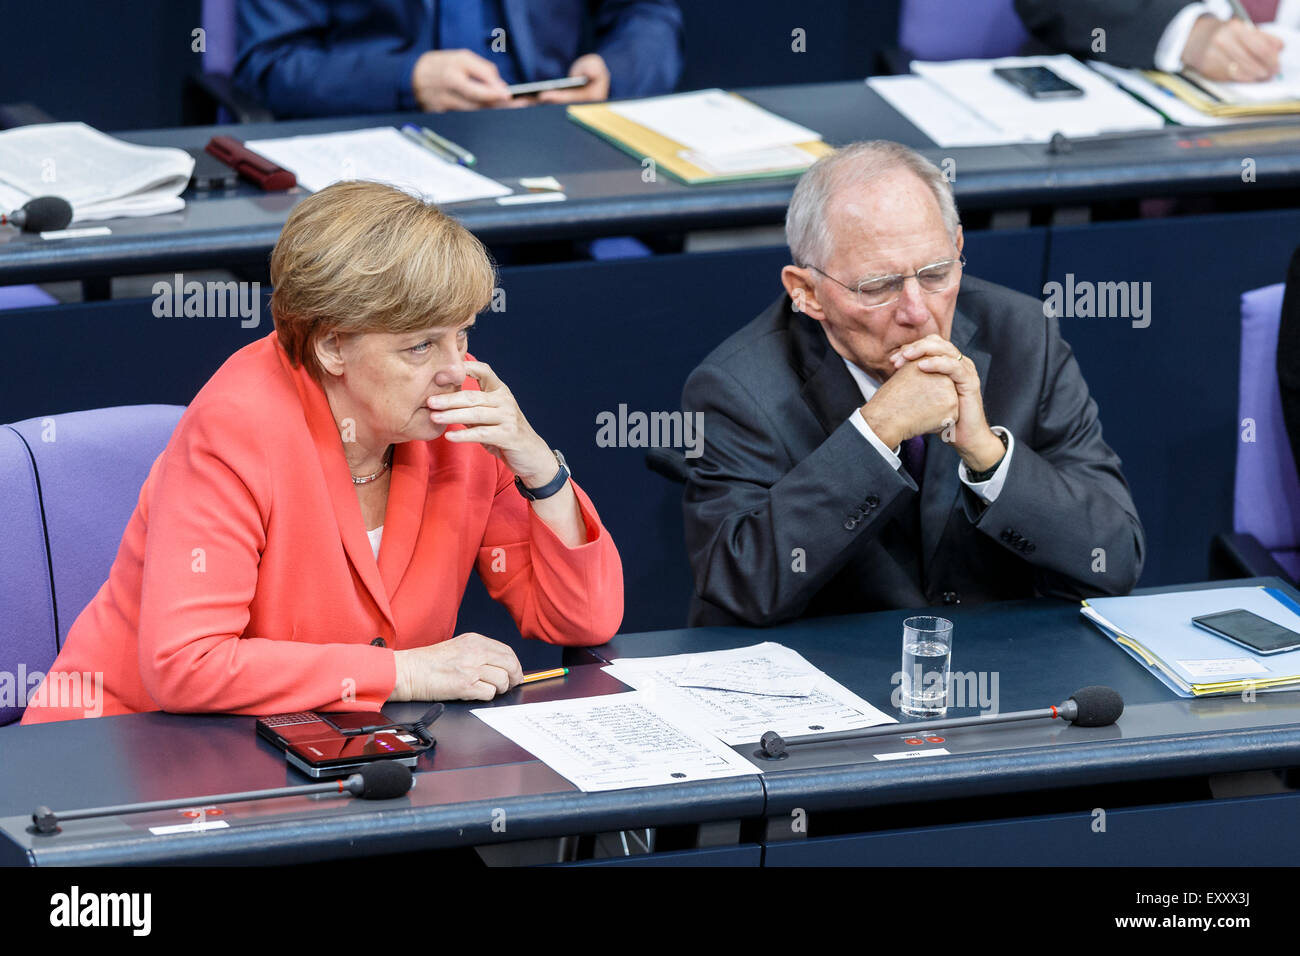 Berlin, Germany. 17th July, 2015. Special session of the German Parliament - consultation of government on the ' negotiations of the Government Federal relative to the concession of financial support for the Hellenic Republic of Greece ' realized at the German Parliament on 17.07.2015 in Berlin, Germany. / Picture: German Chancellor Angela Merkel talks with Wolfgang Schäuble (CDU), German Minister of Finance, during the session of the german Parliament relative to the concession of financial support for the Hellenic Republic of Greece. Credit:  Reynaldo Chaib Paganelli/Alamy Live News Stock Photo